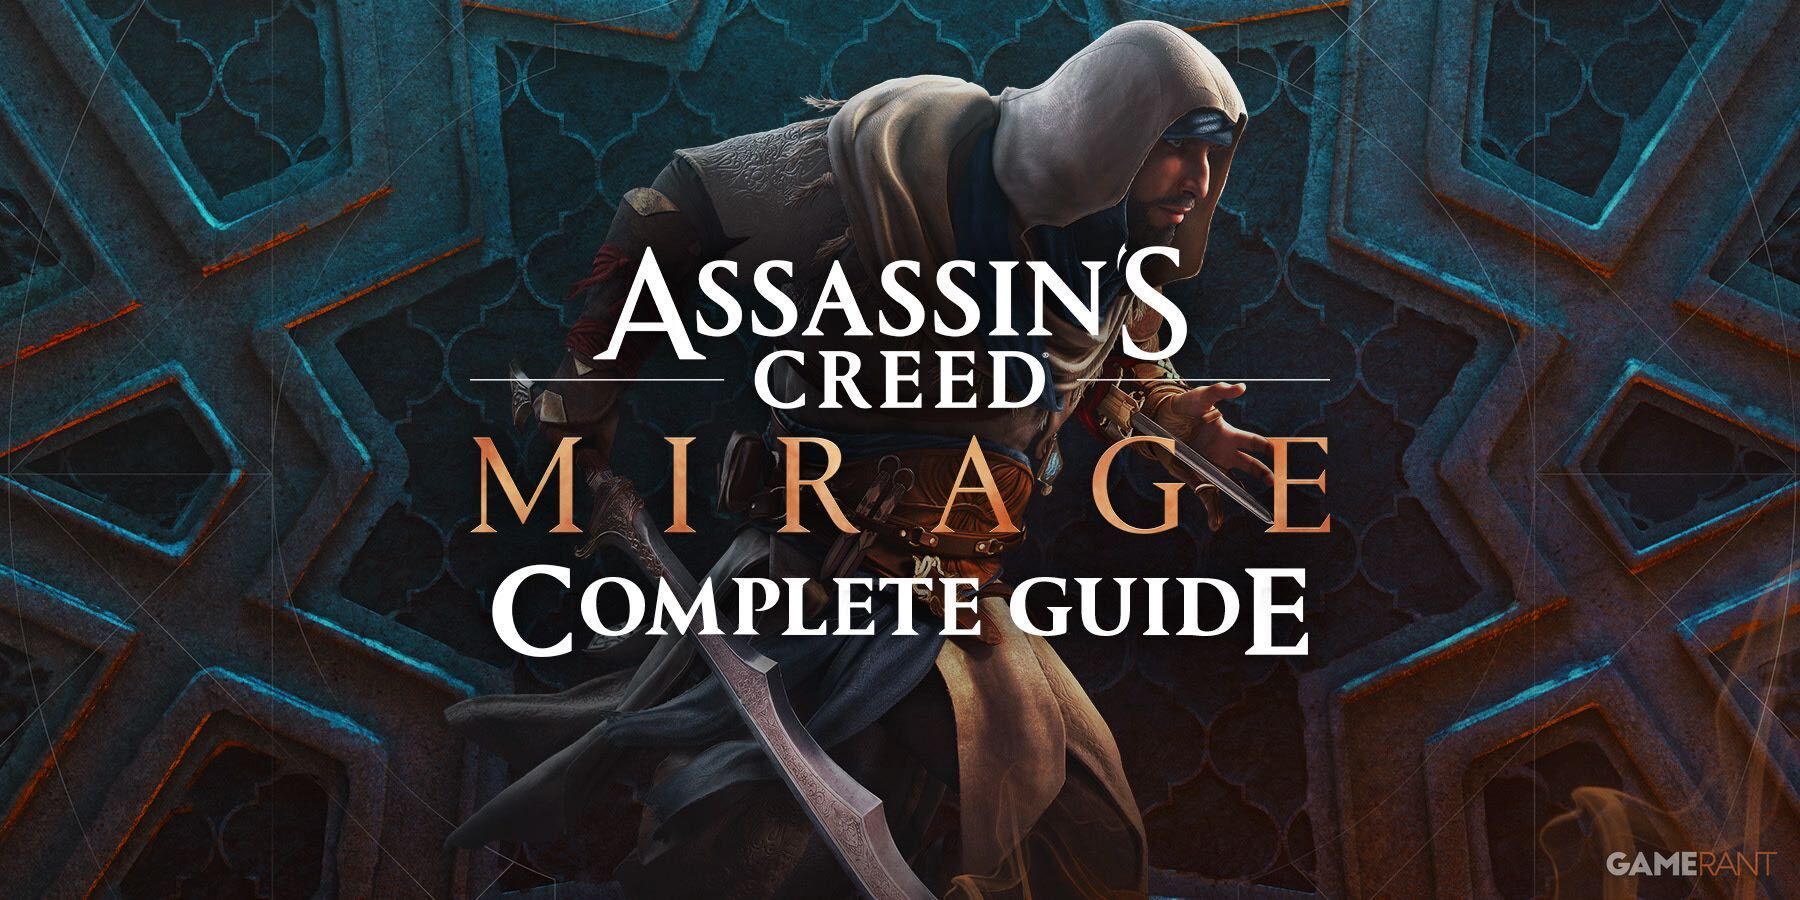 Assassin's Creed Mirage December Update Adding Fan Favorite Features